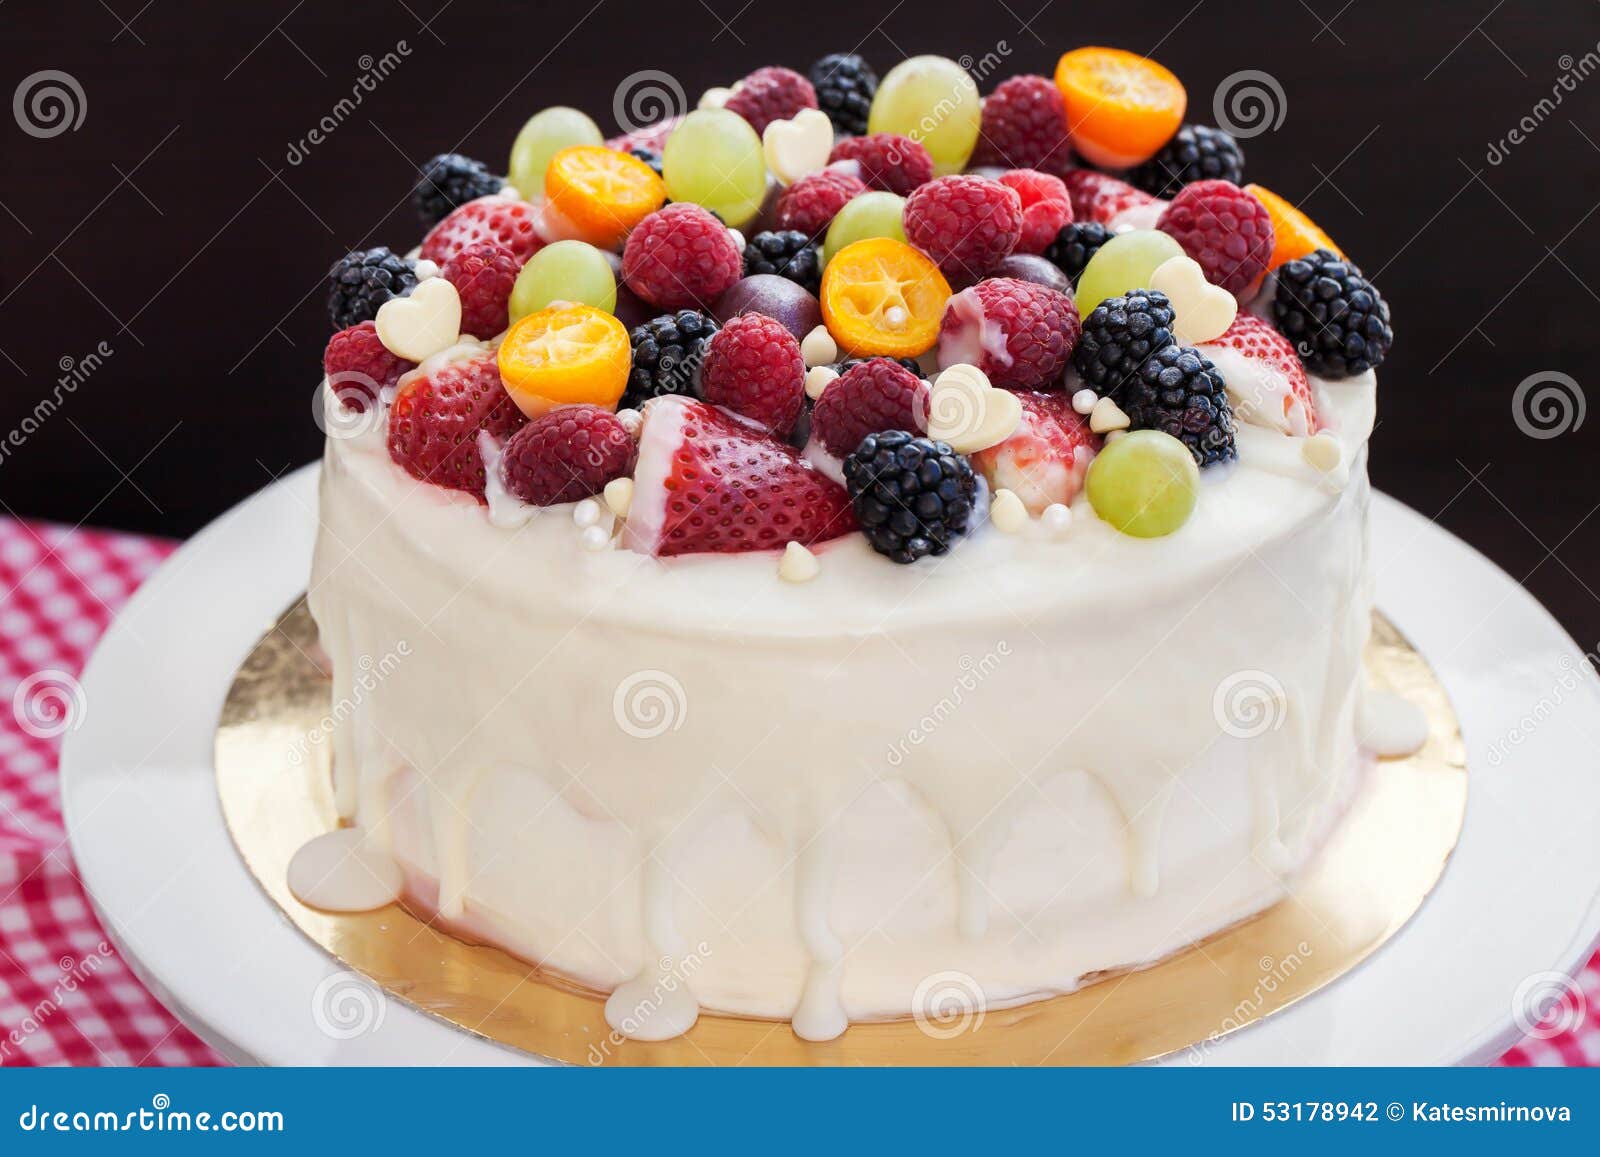 White Chocolate Cake Decorated with Fresh Berries and Fruits Stock ...